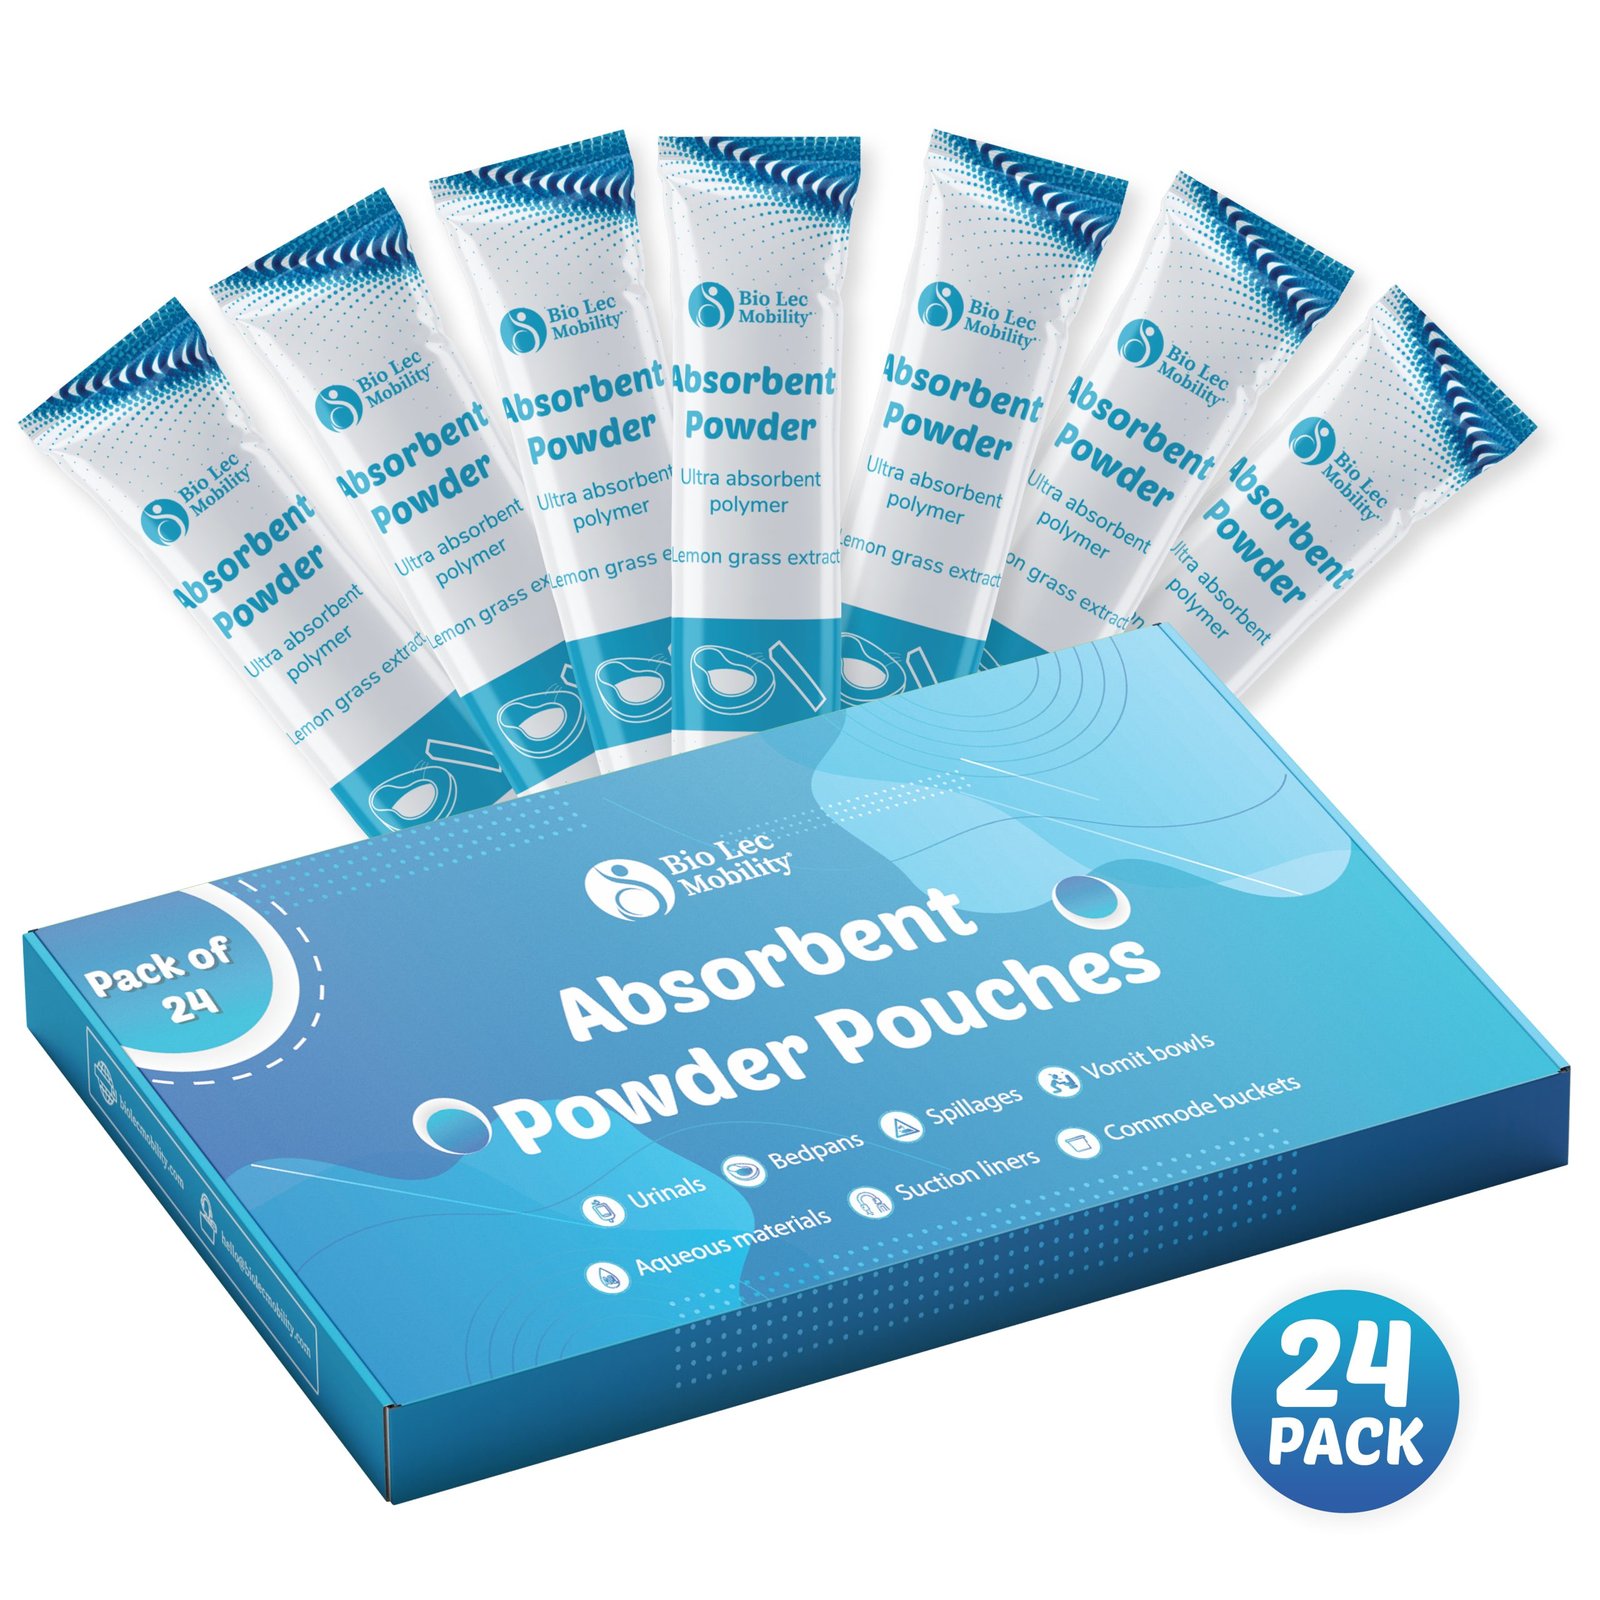 Absorbent Pouches for Bodily Fluids and spills